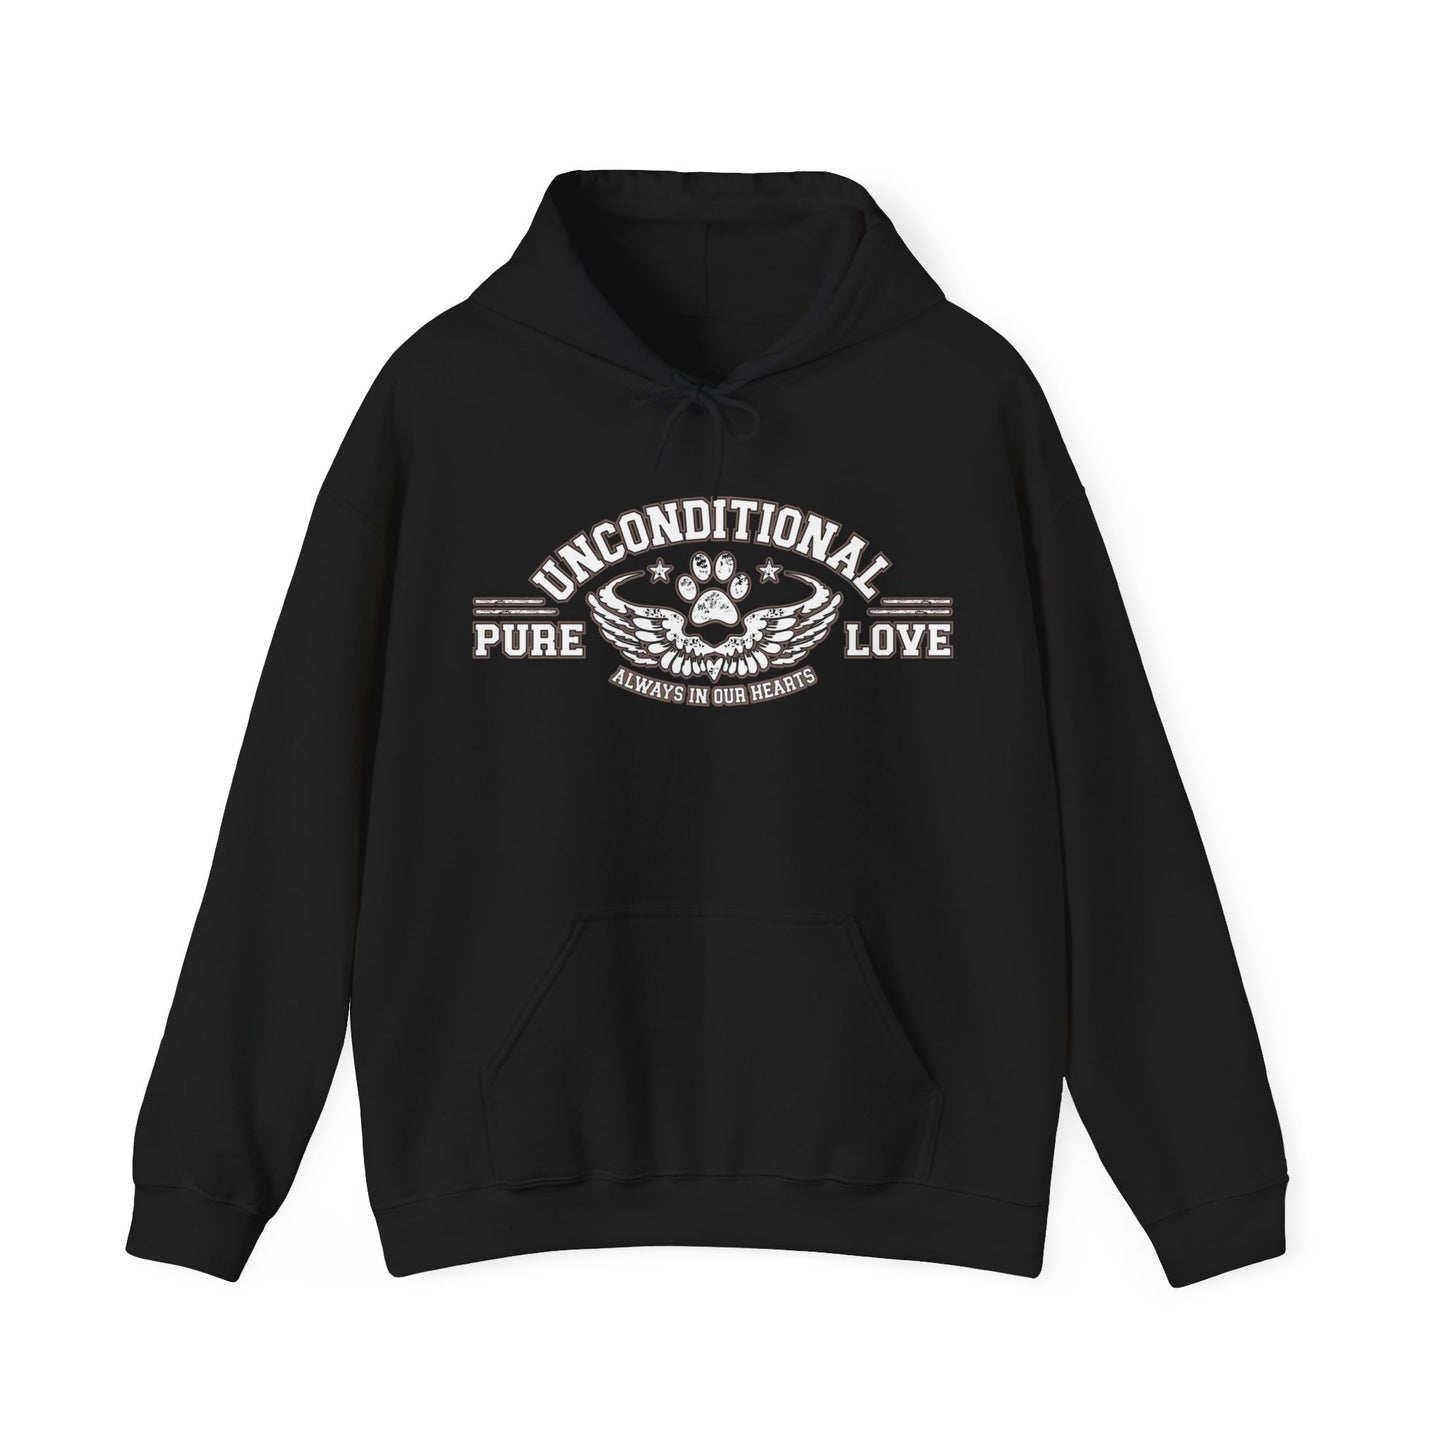 The slogan 'Unconditional Pure Love, forever in our hearts by Dogs Pure Love, printed on a black unisex hoodie, is set against a white background.